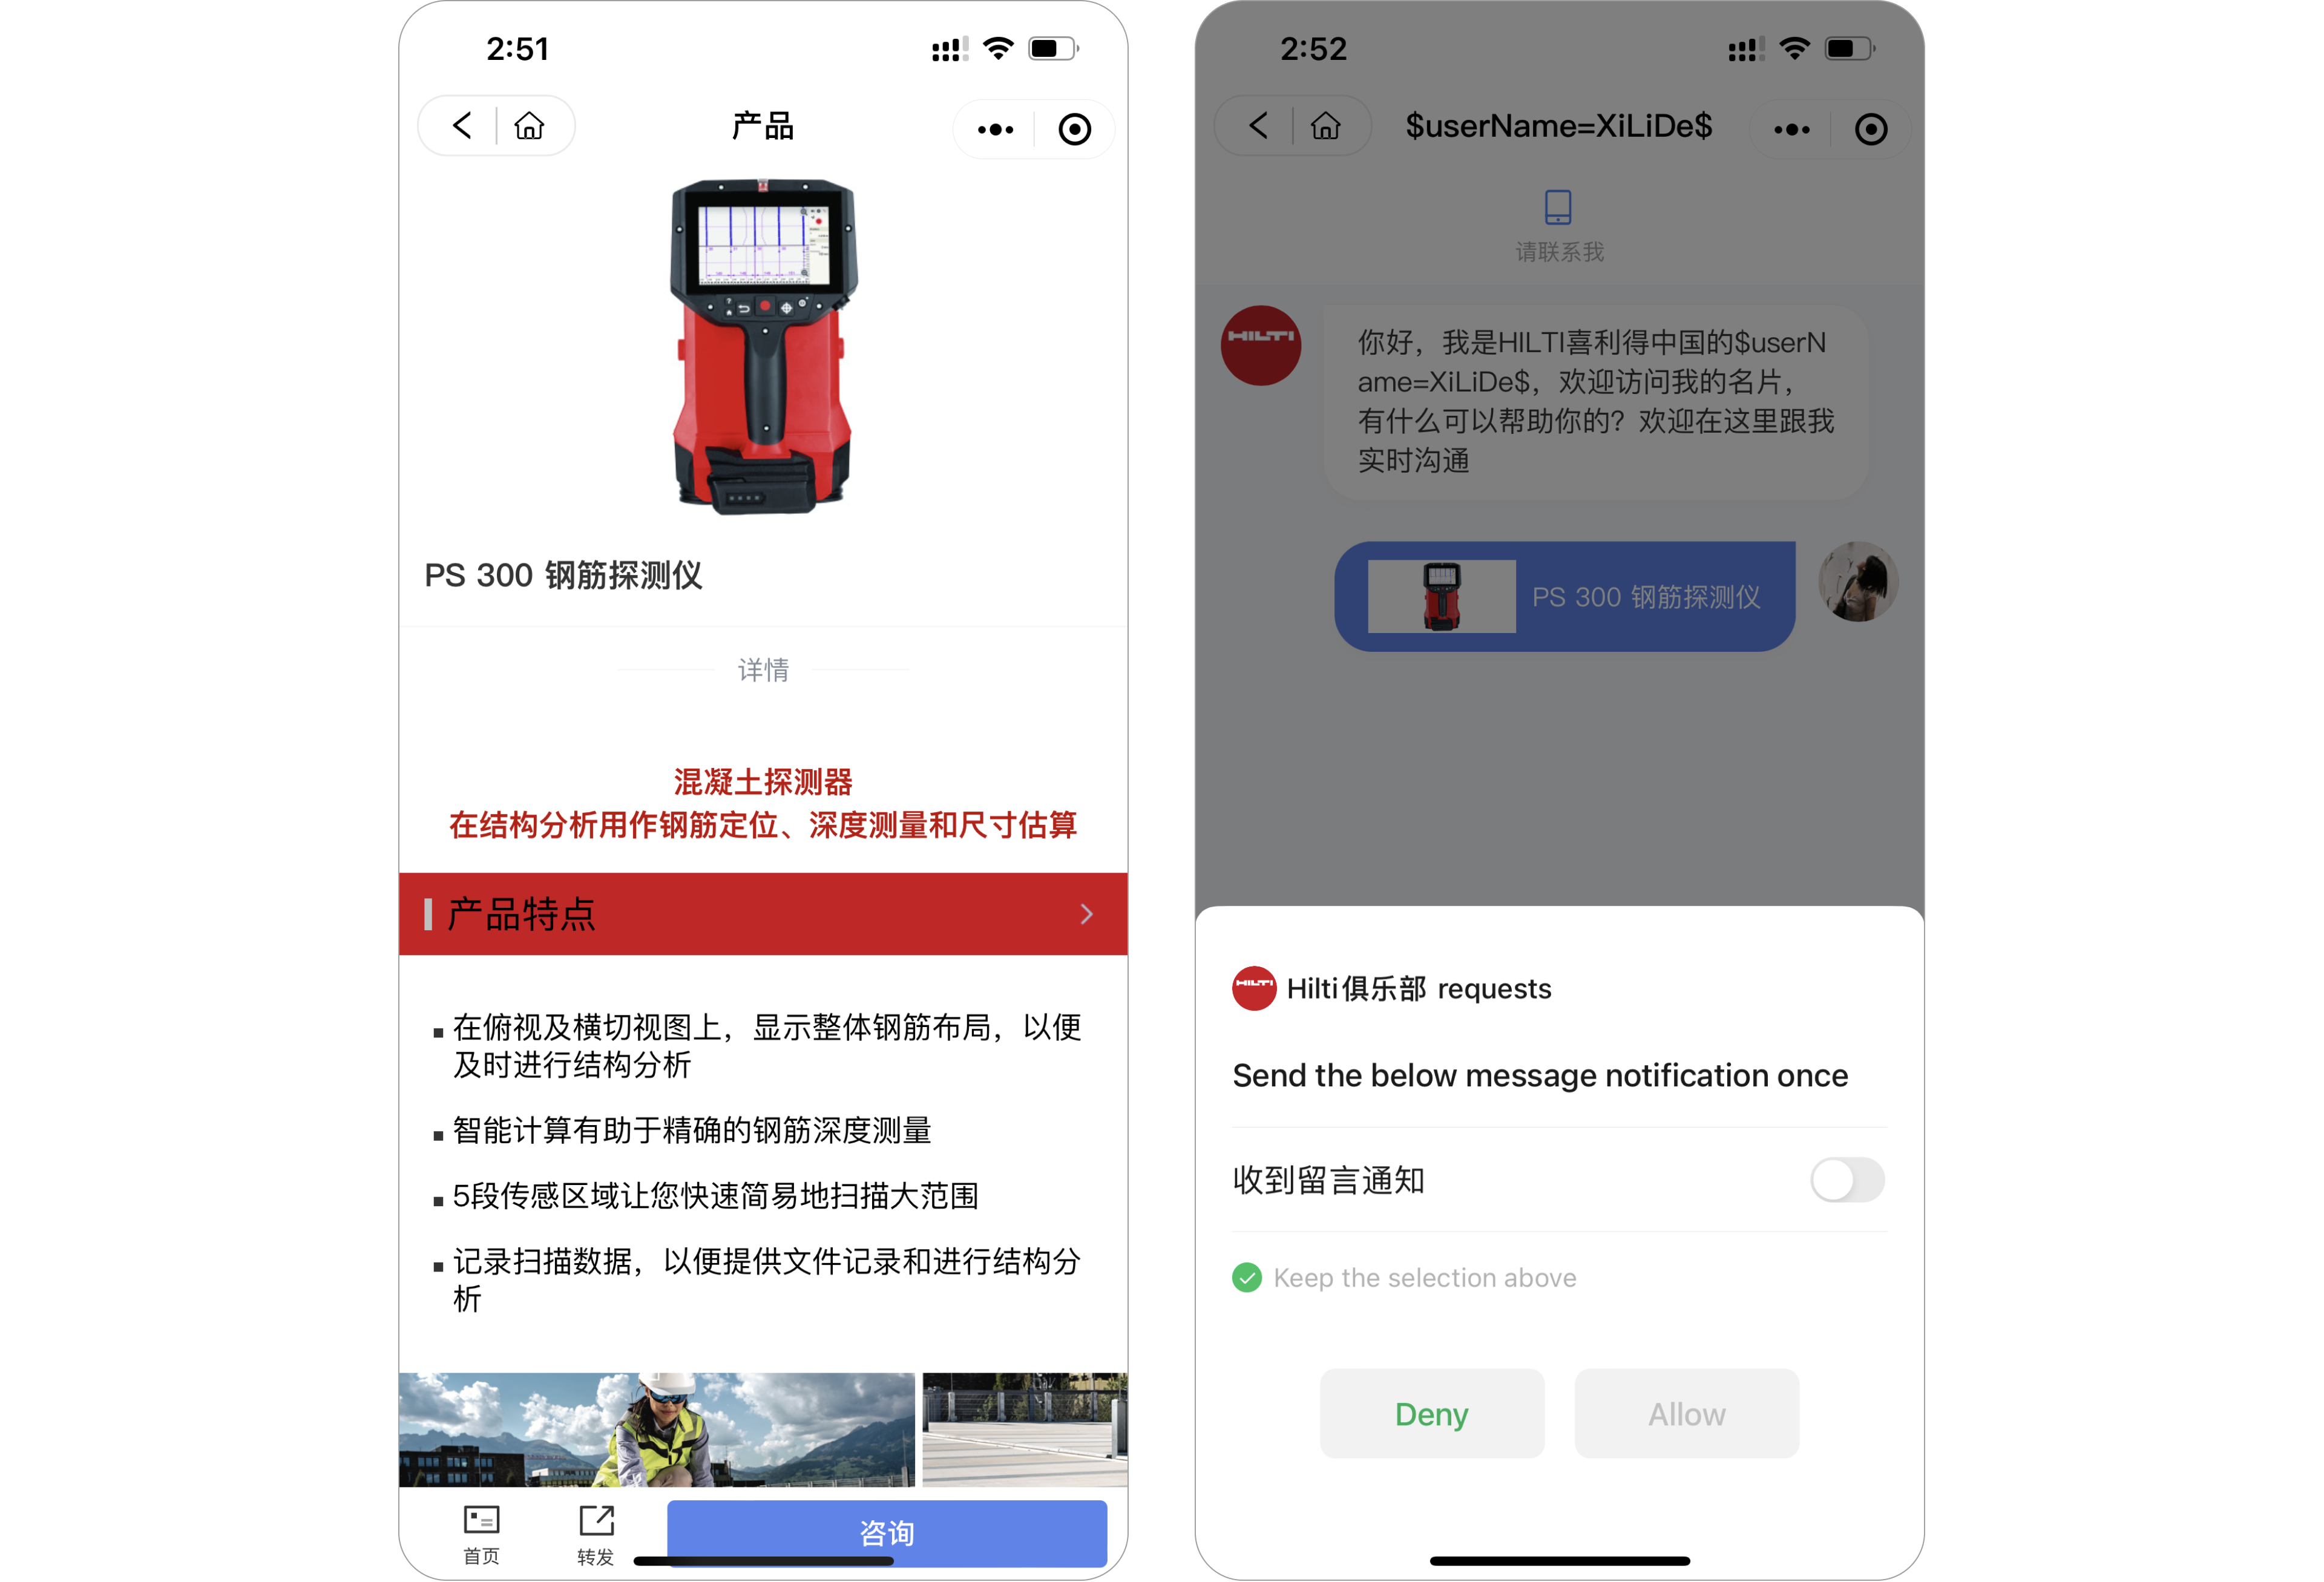 Hilti Corporation, a manufacturing company sets up a direct portal to WeChat Customer Service